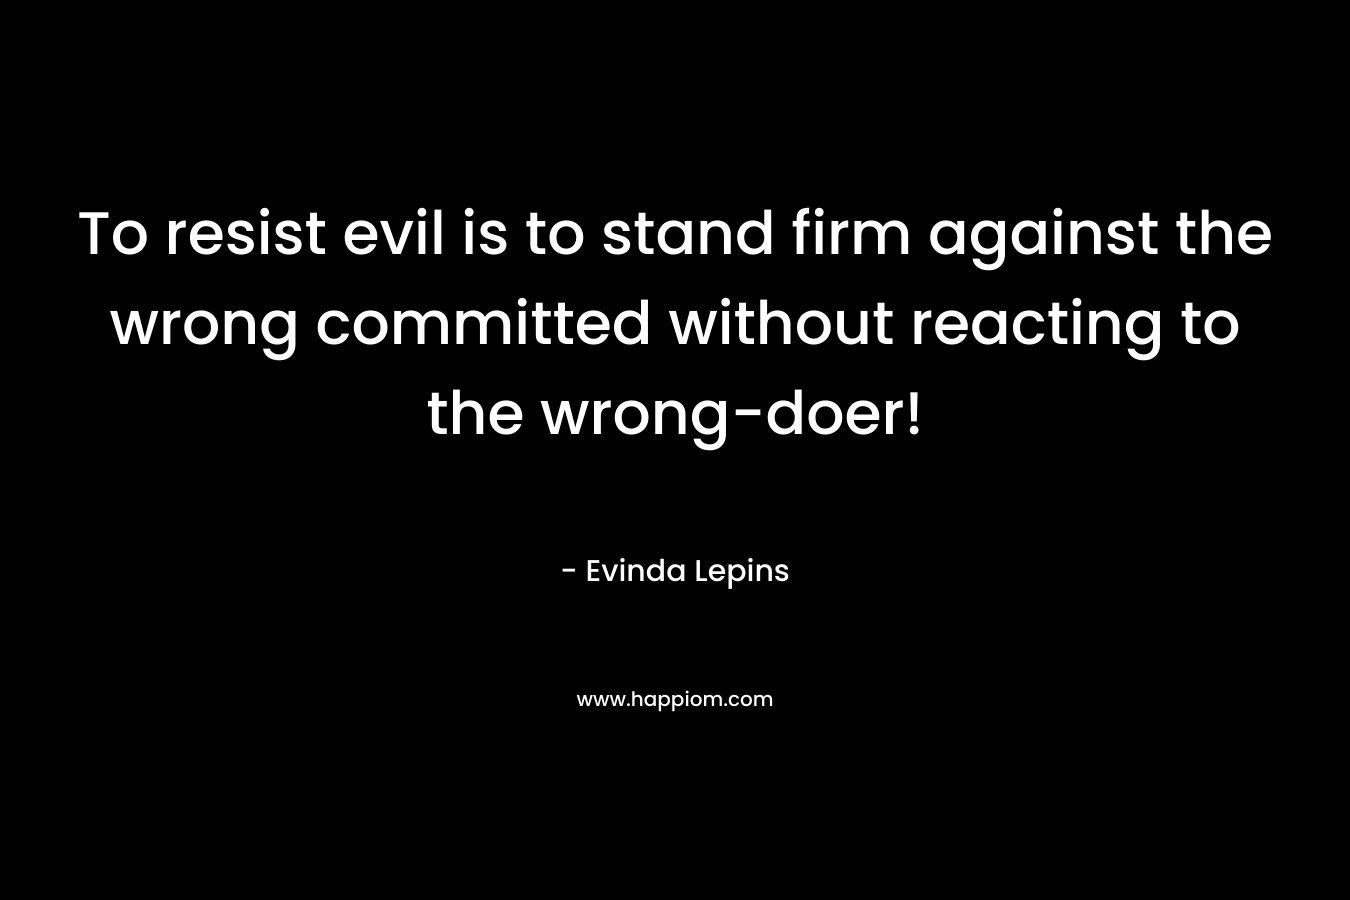 To resist evil is to stand firm against the wrong committed without reacting to the wrong-doer!